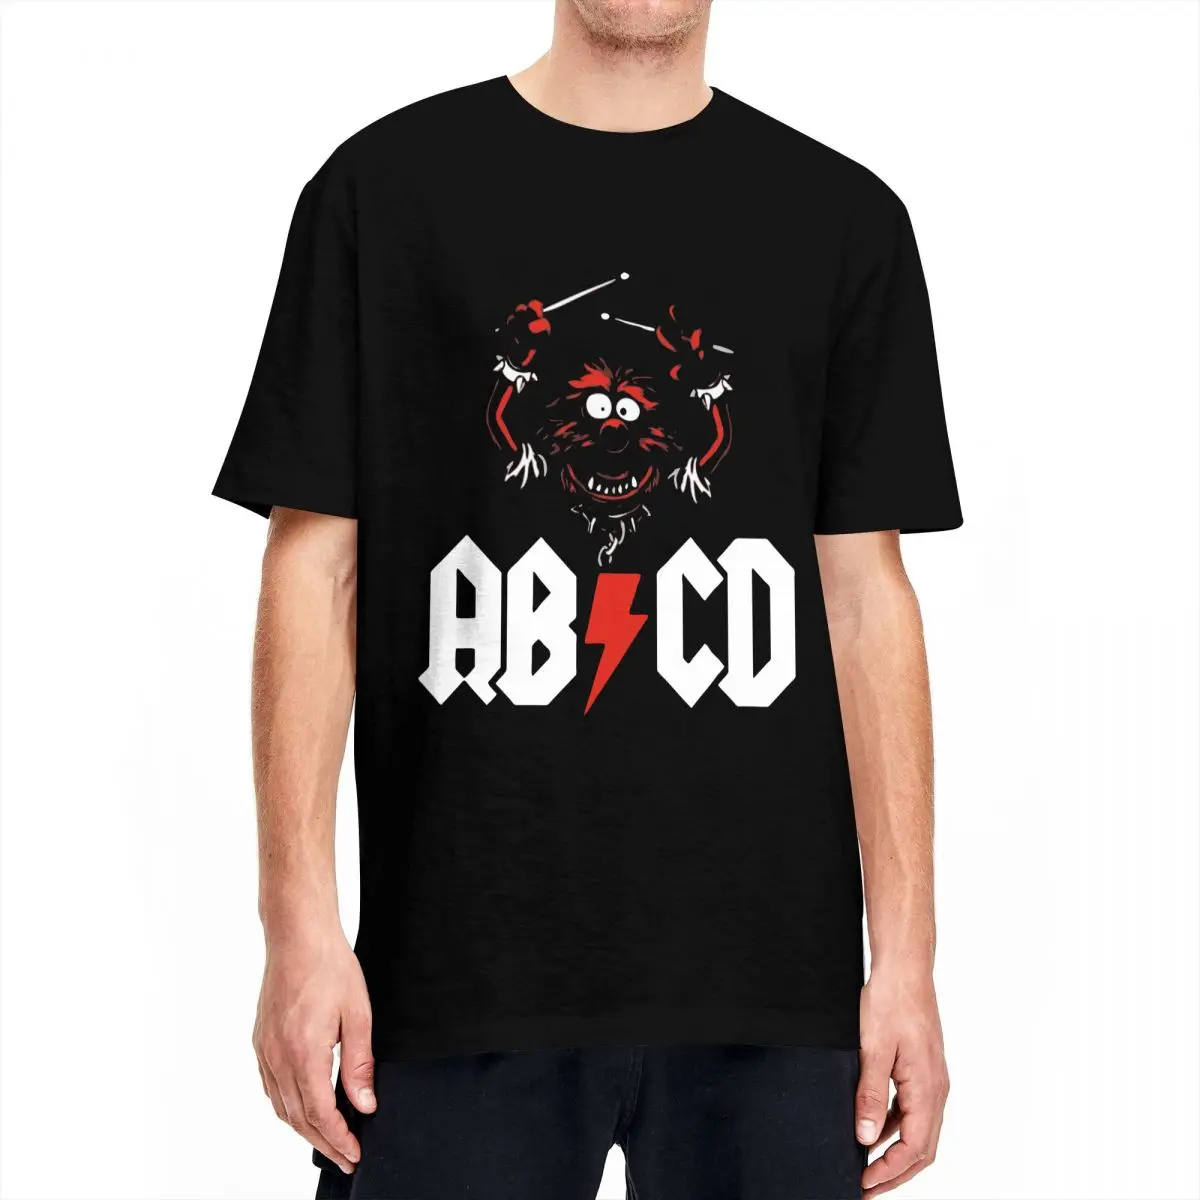 Animal Drummer ABCD The Muppets Show Men Women T Shirts Crazy Tee Shirt Crew Neck T-Shirt Pure Cotton Graphic Printed Clothing